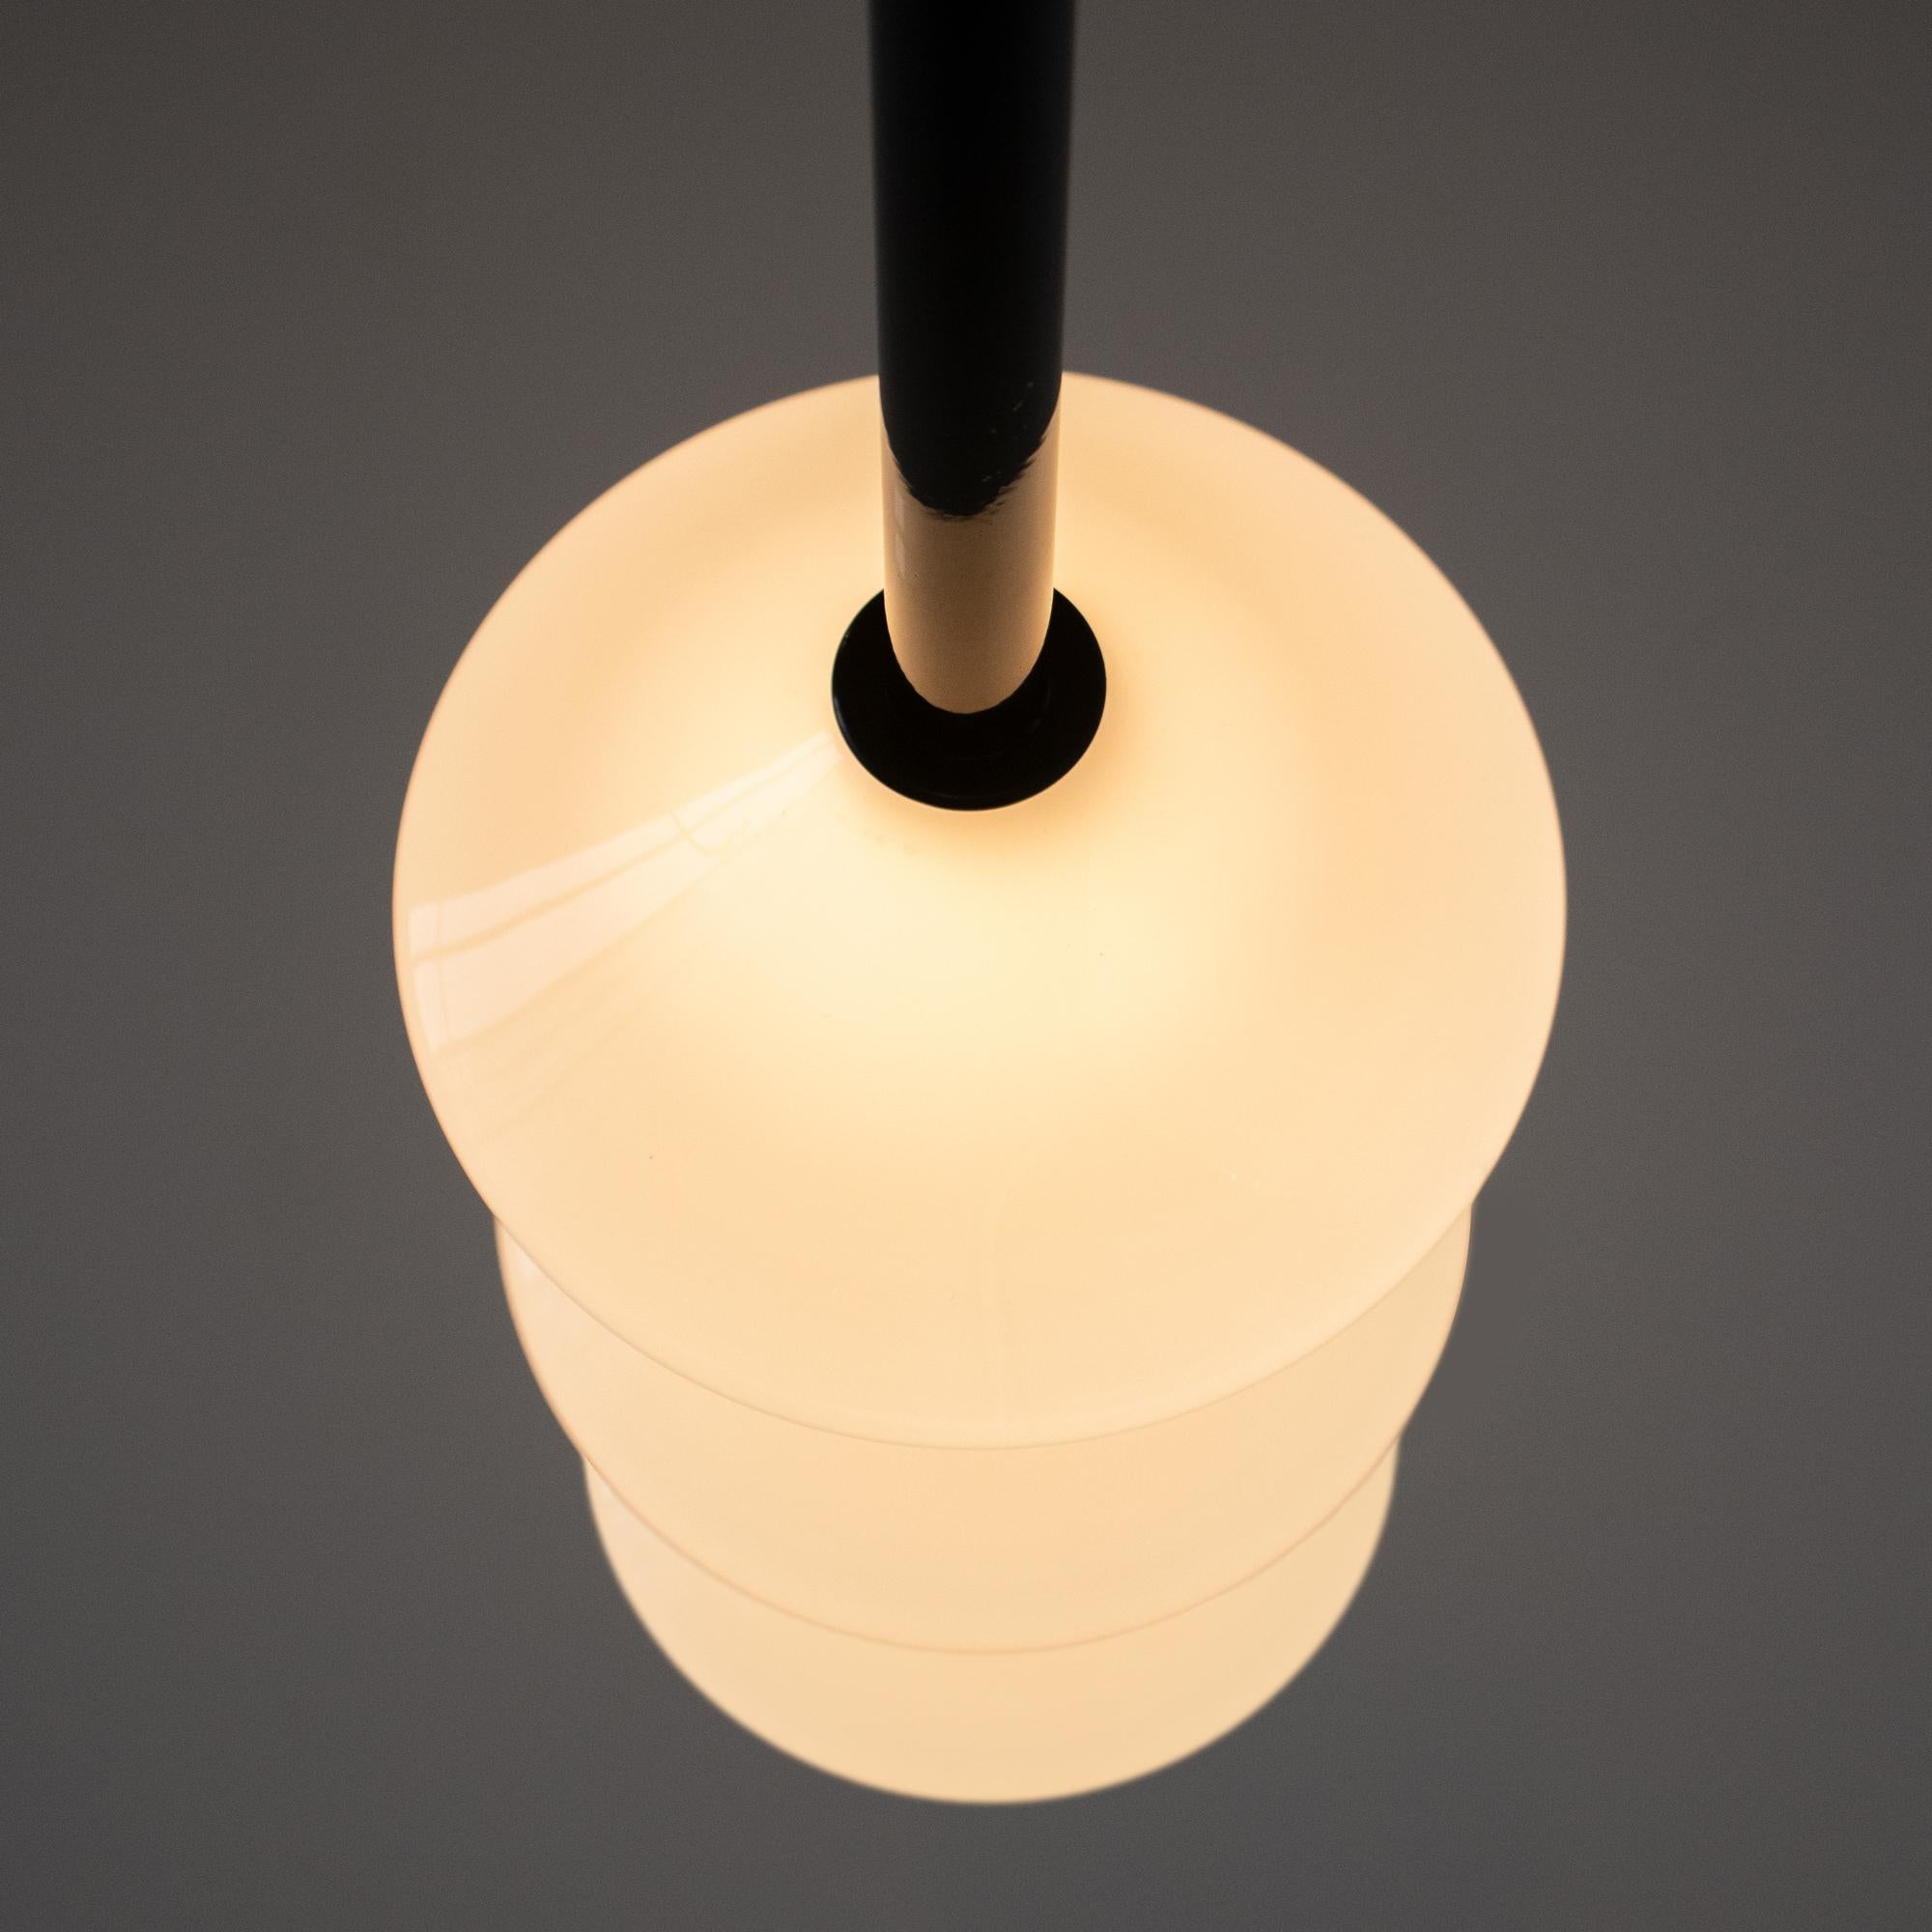 The GEM 3 Linear Pendant is built of brass with an LED light source that is diffused by a hand-blown opal white glass diffuser. This pendant works as an individual fixture or can be installed in larger groupings to create a dynamic installation. Use